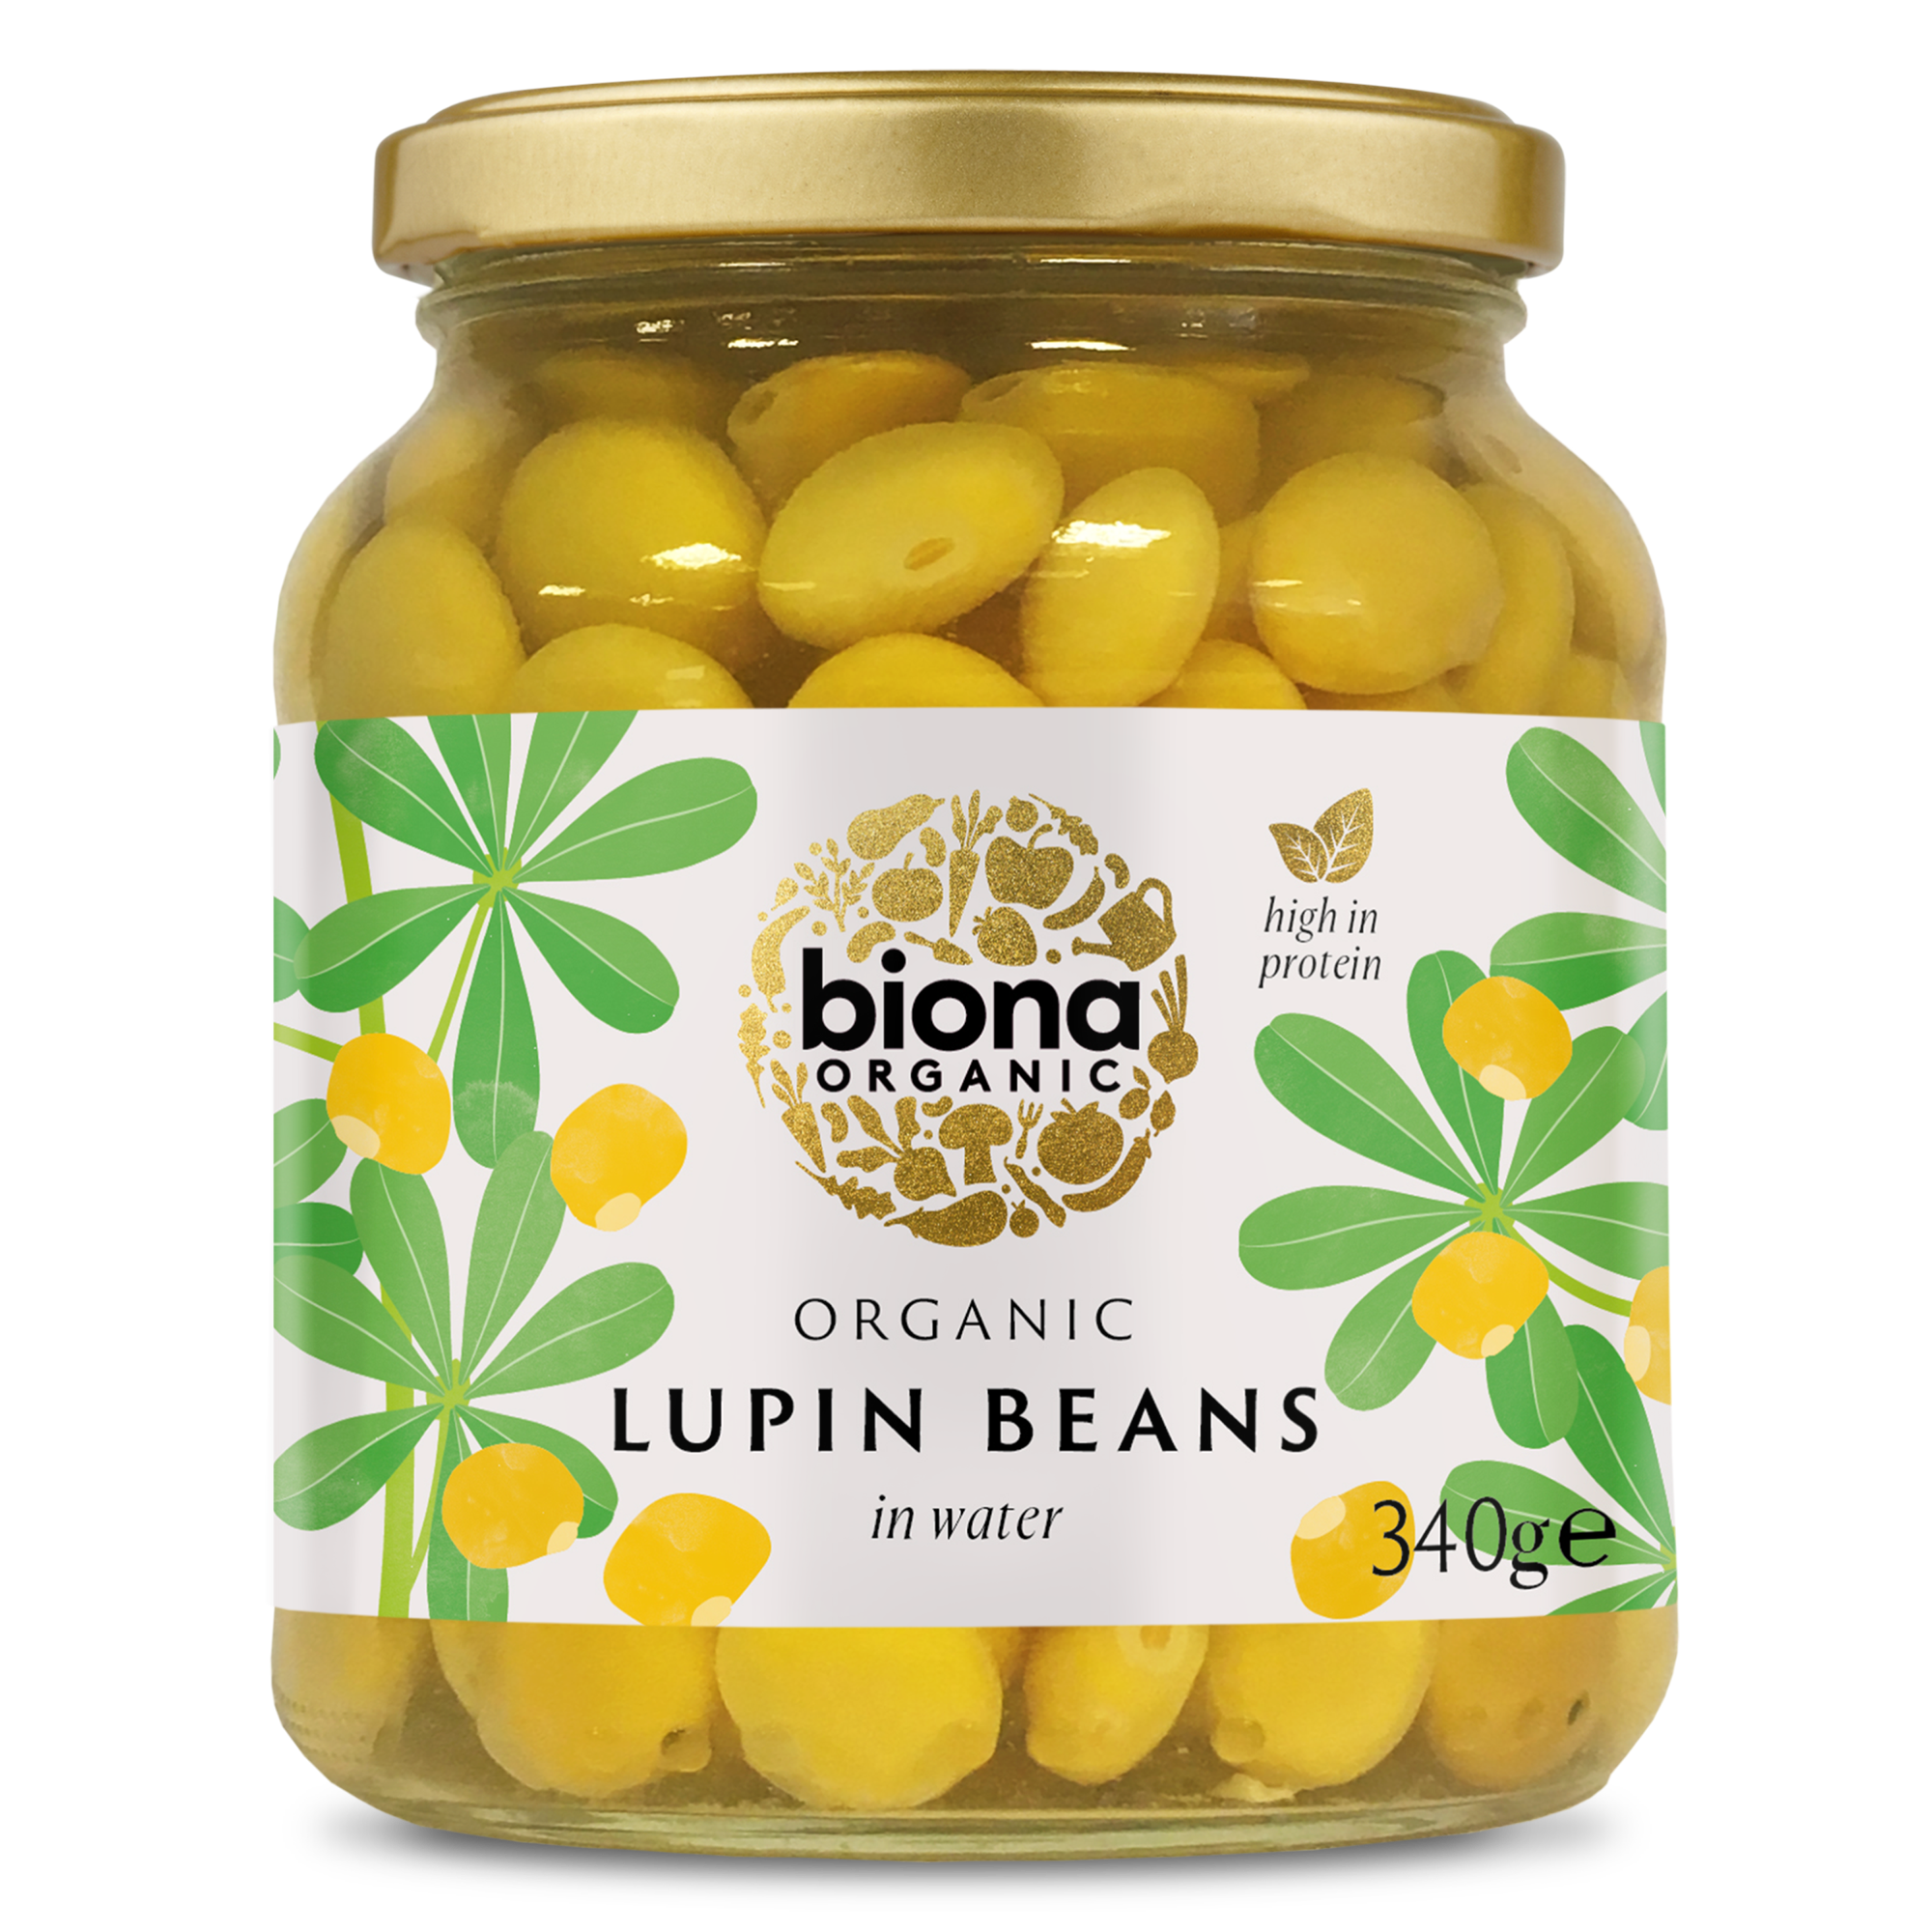 LUPIN BEANS